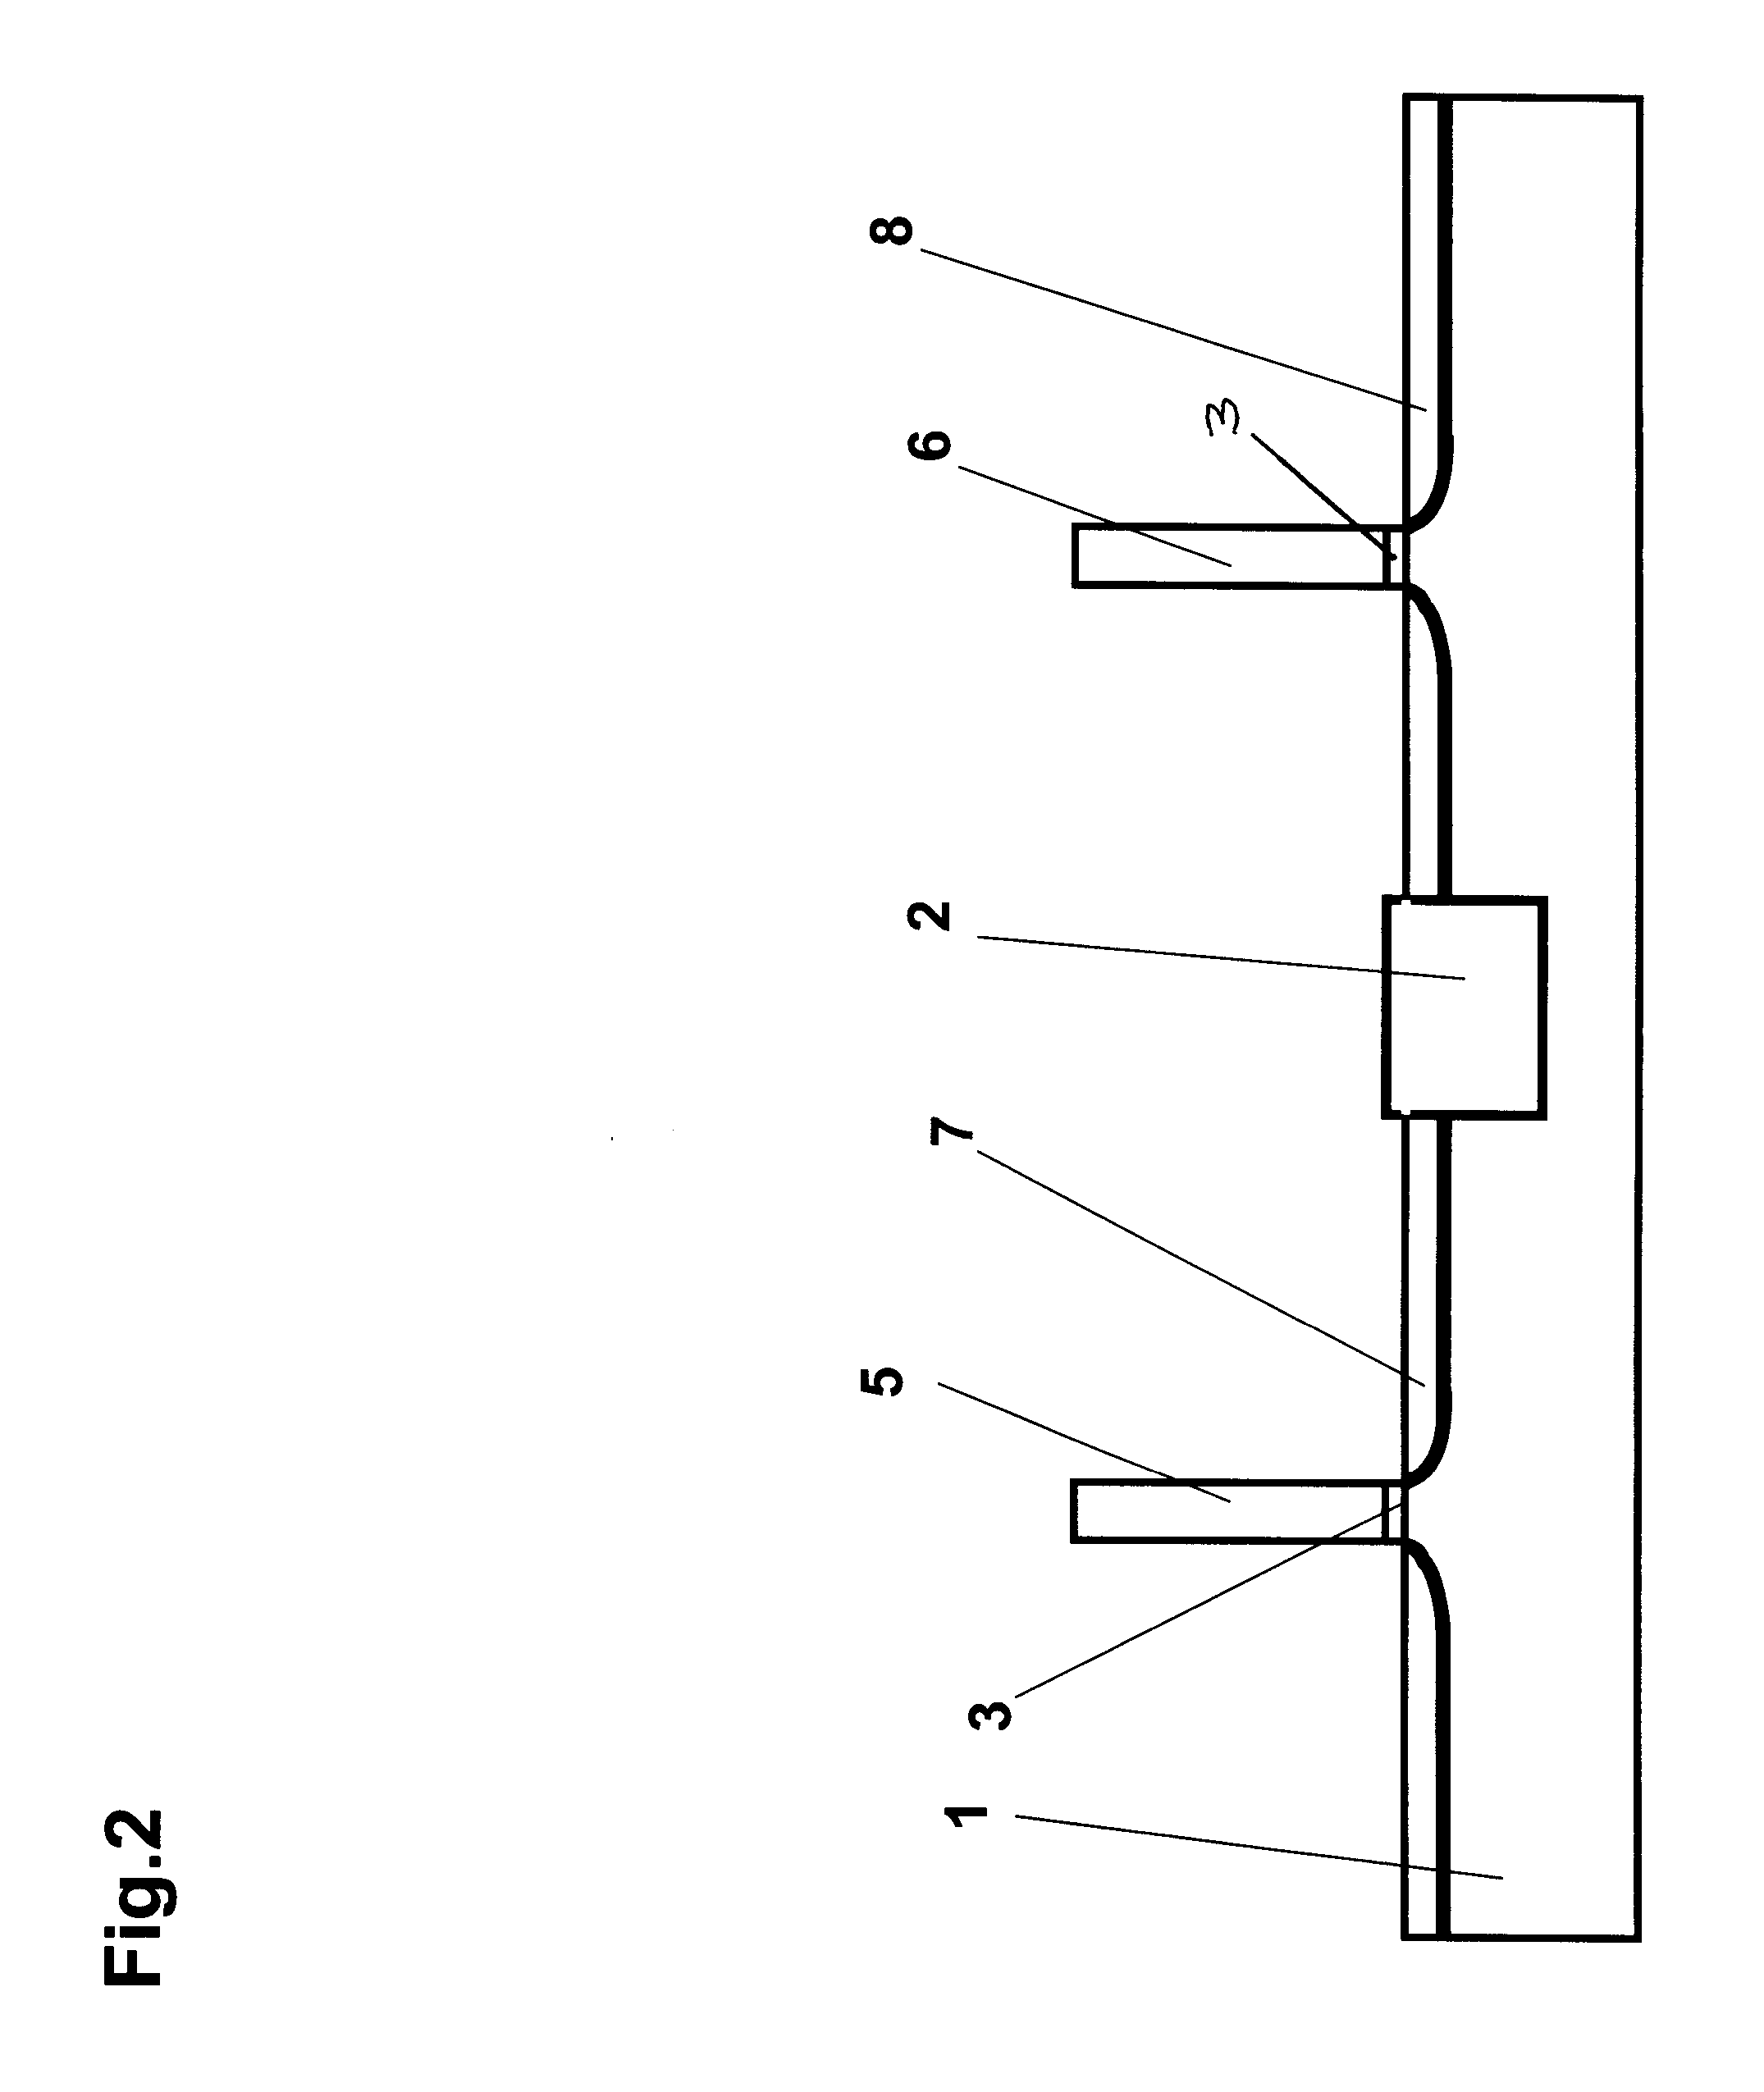 Stressed semiconductor device structures having granular semiconductor material